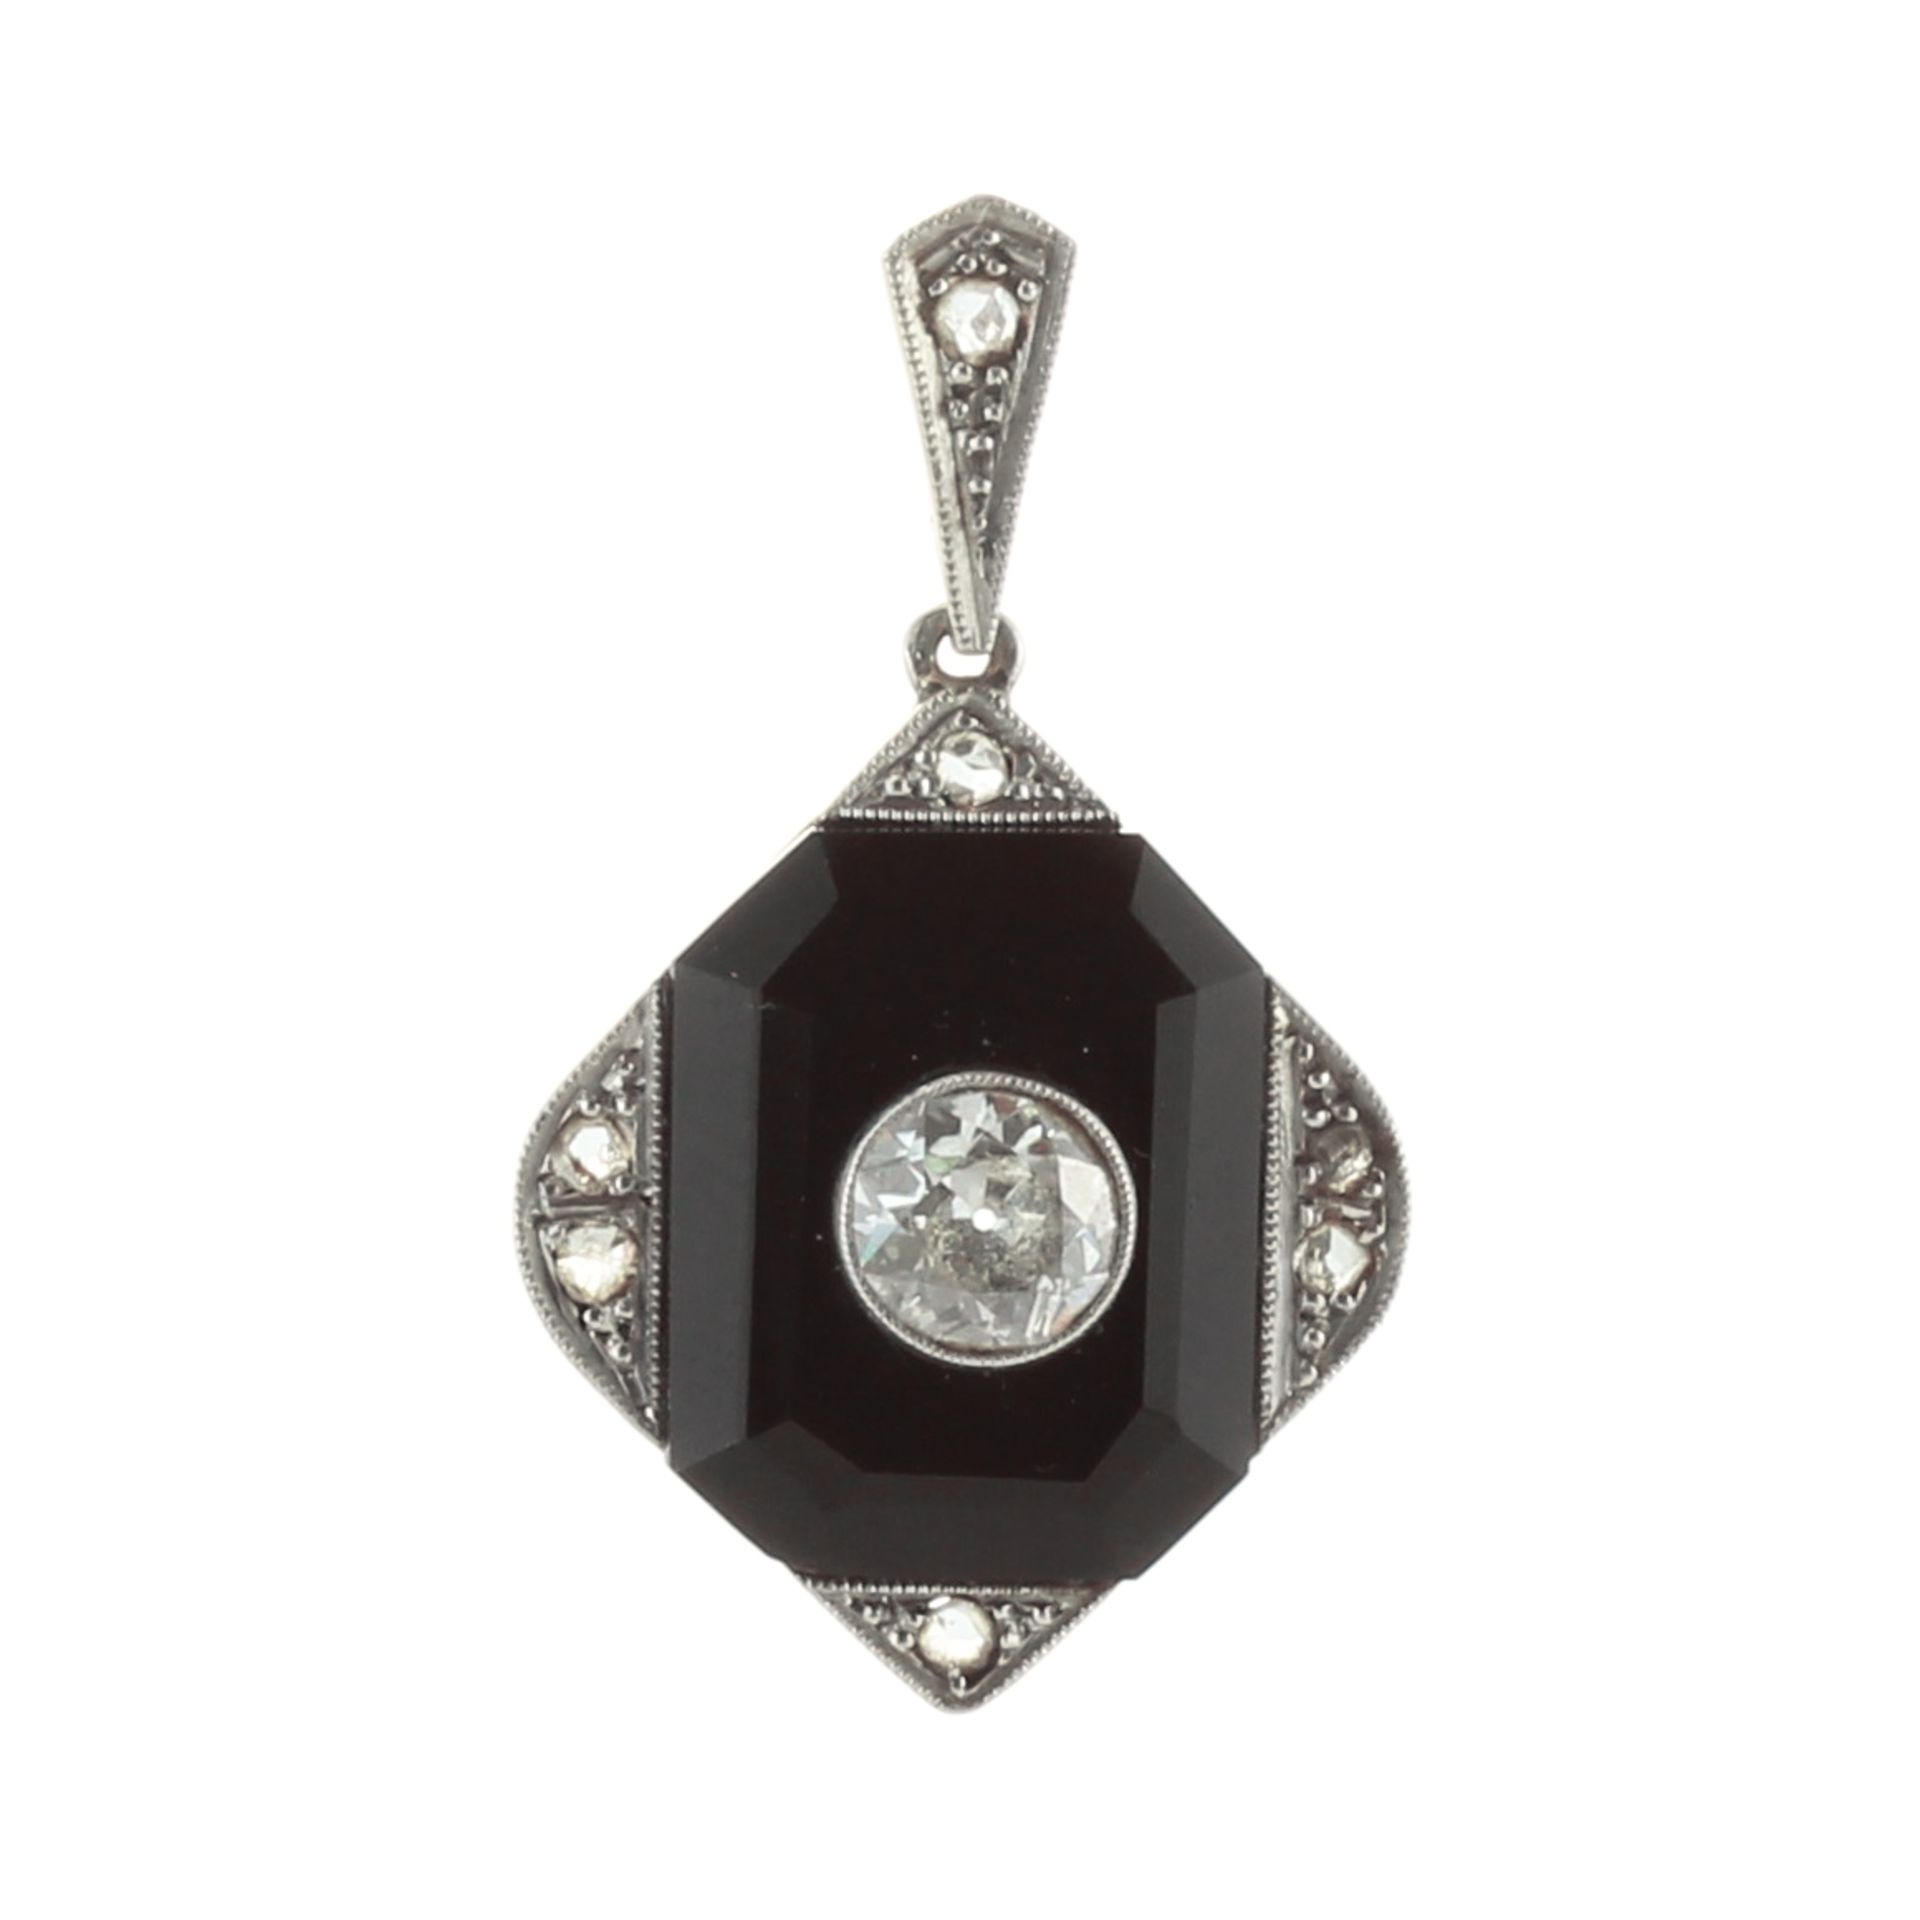 An antique French Art Deco diamond and onyx pendant in gold and platinum set with a carved octagonal